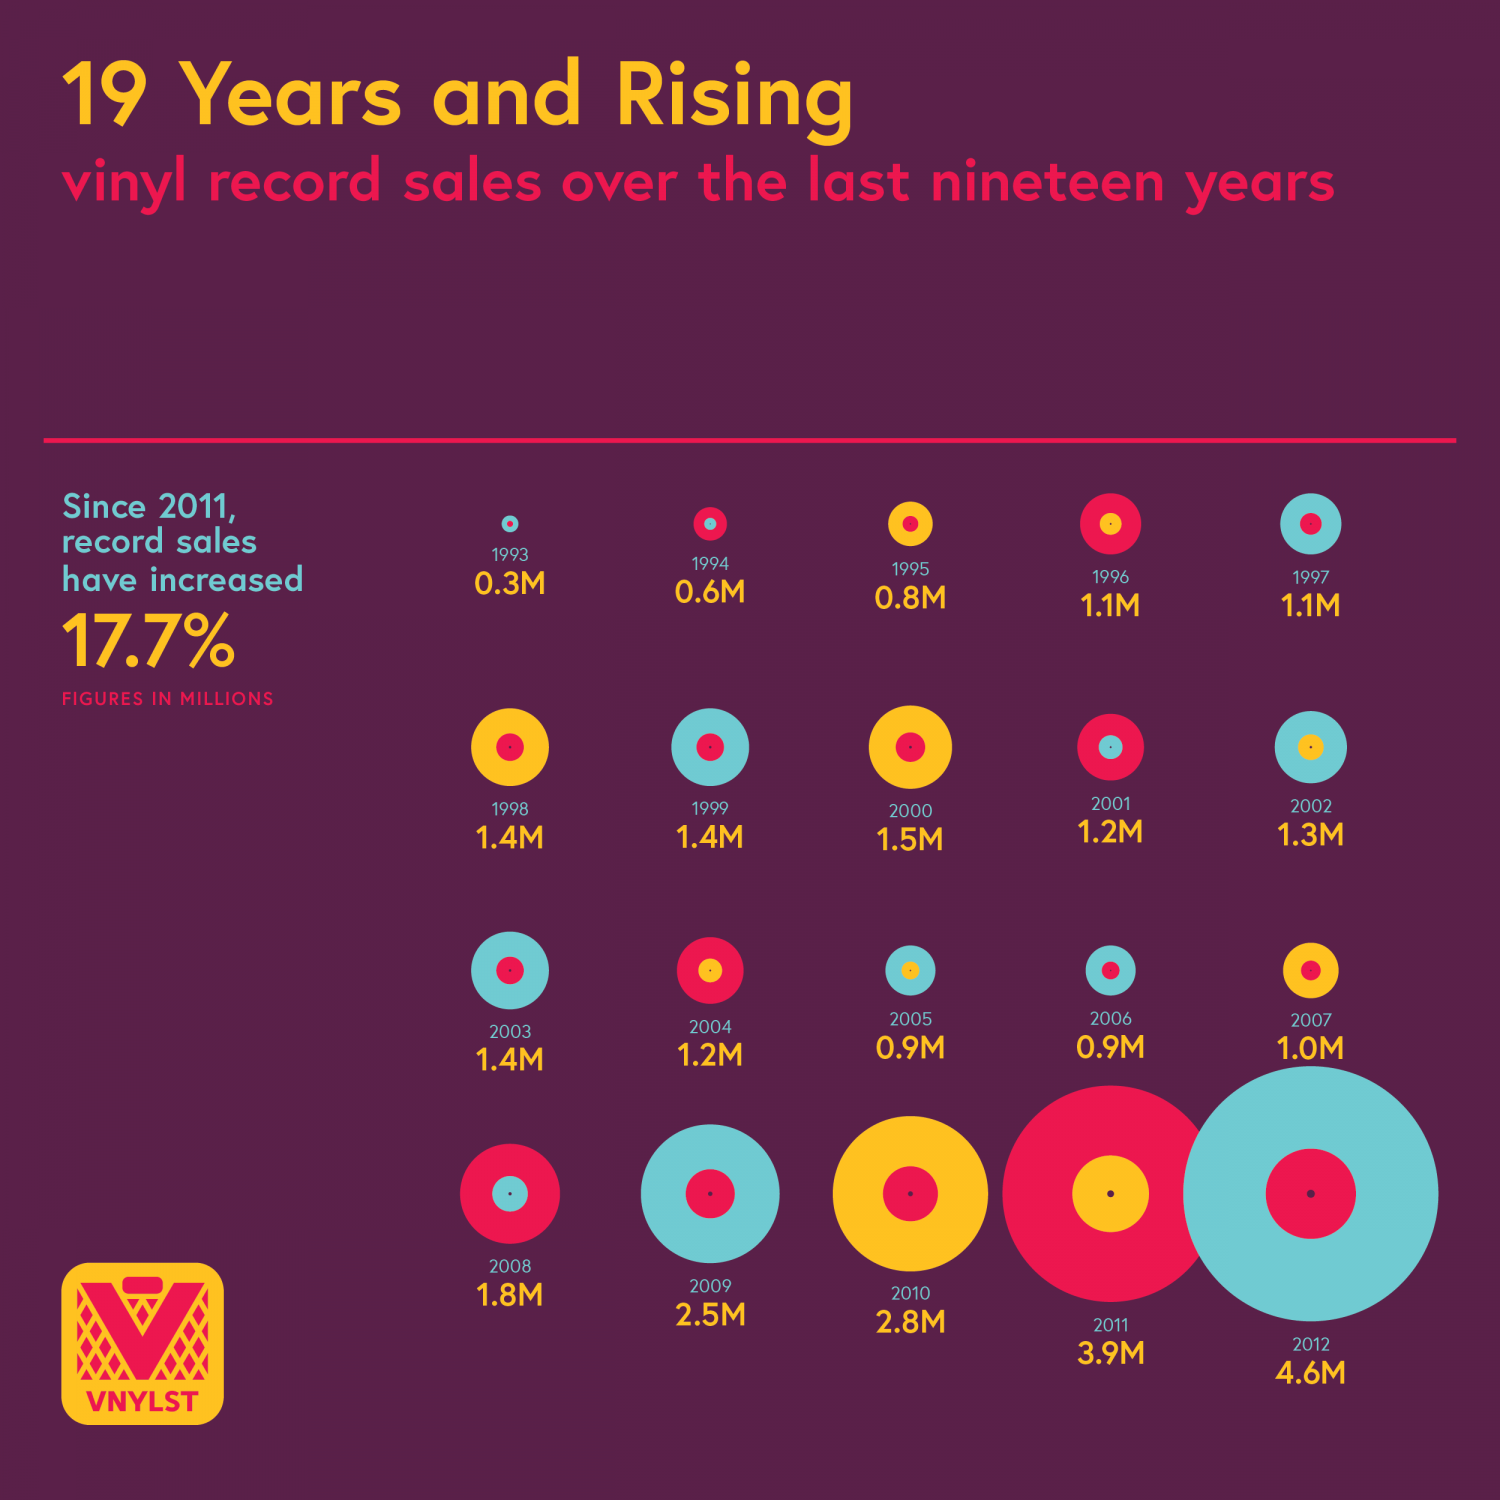 19 Years and Rising Infographic